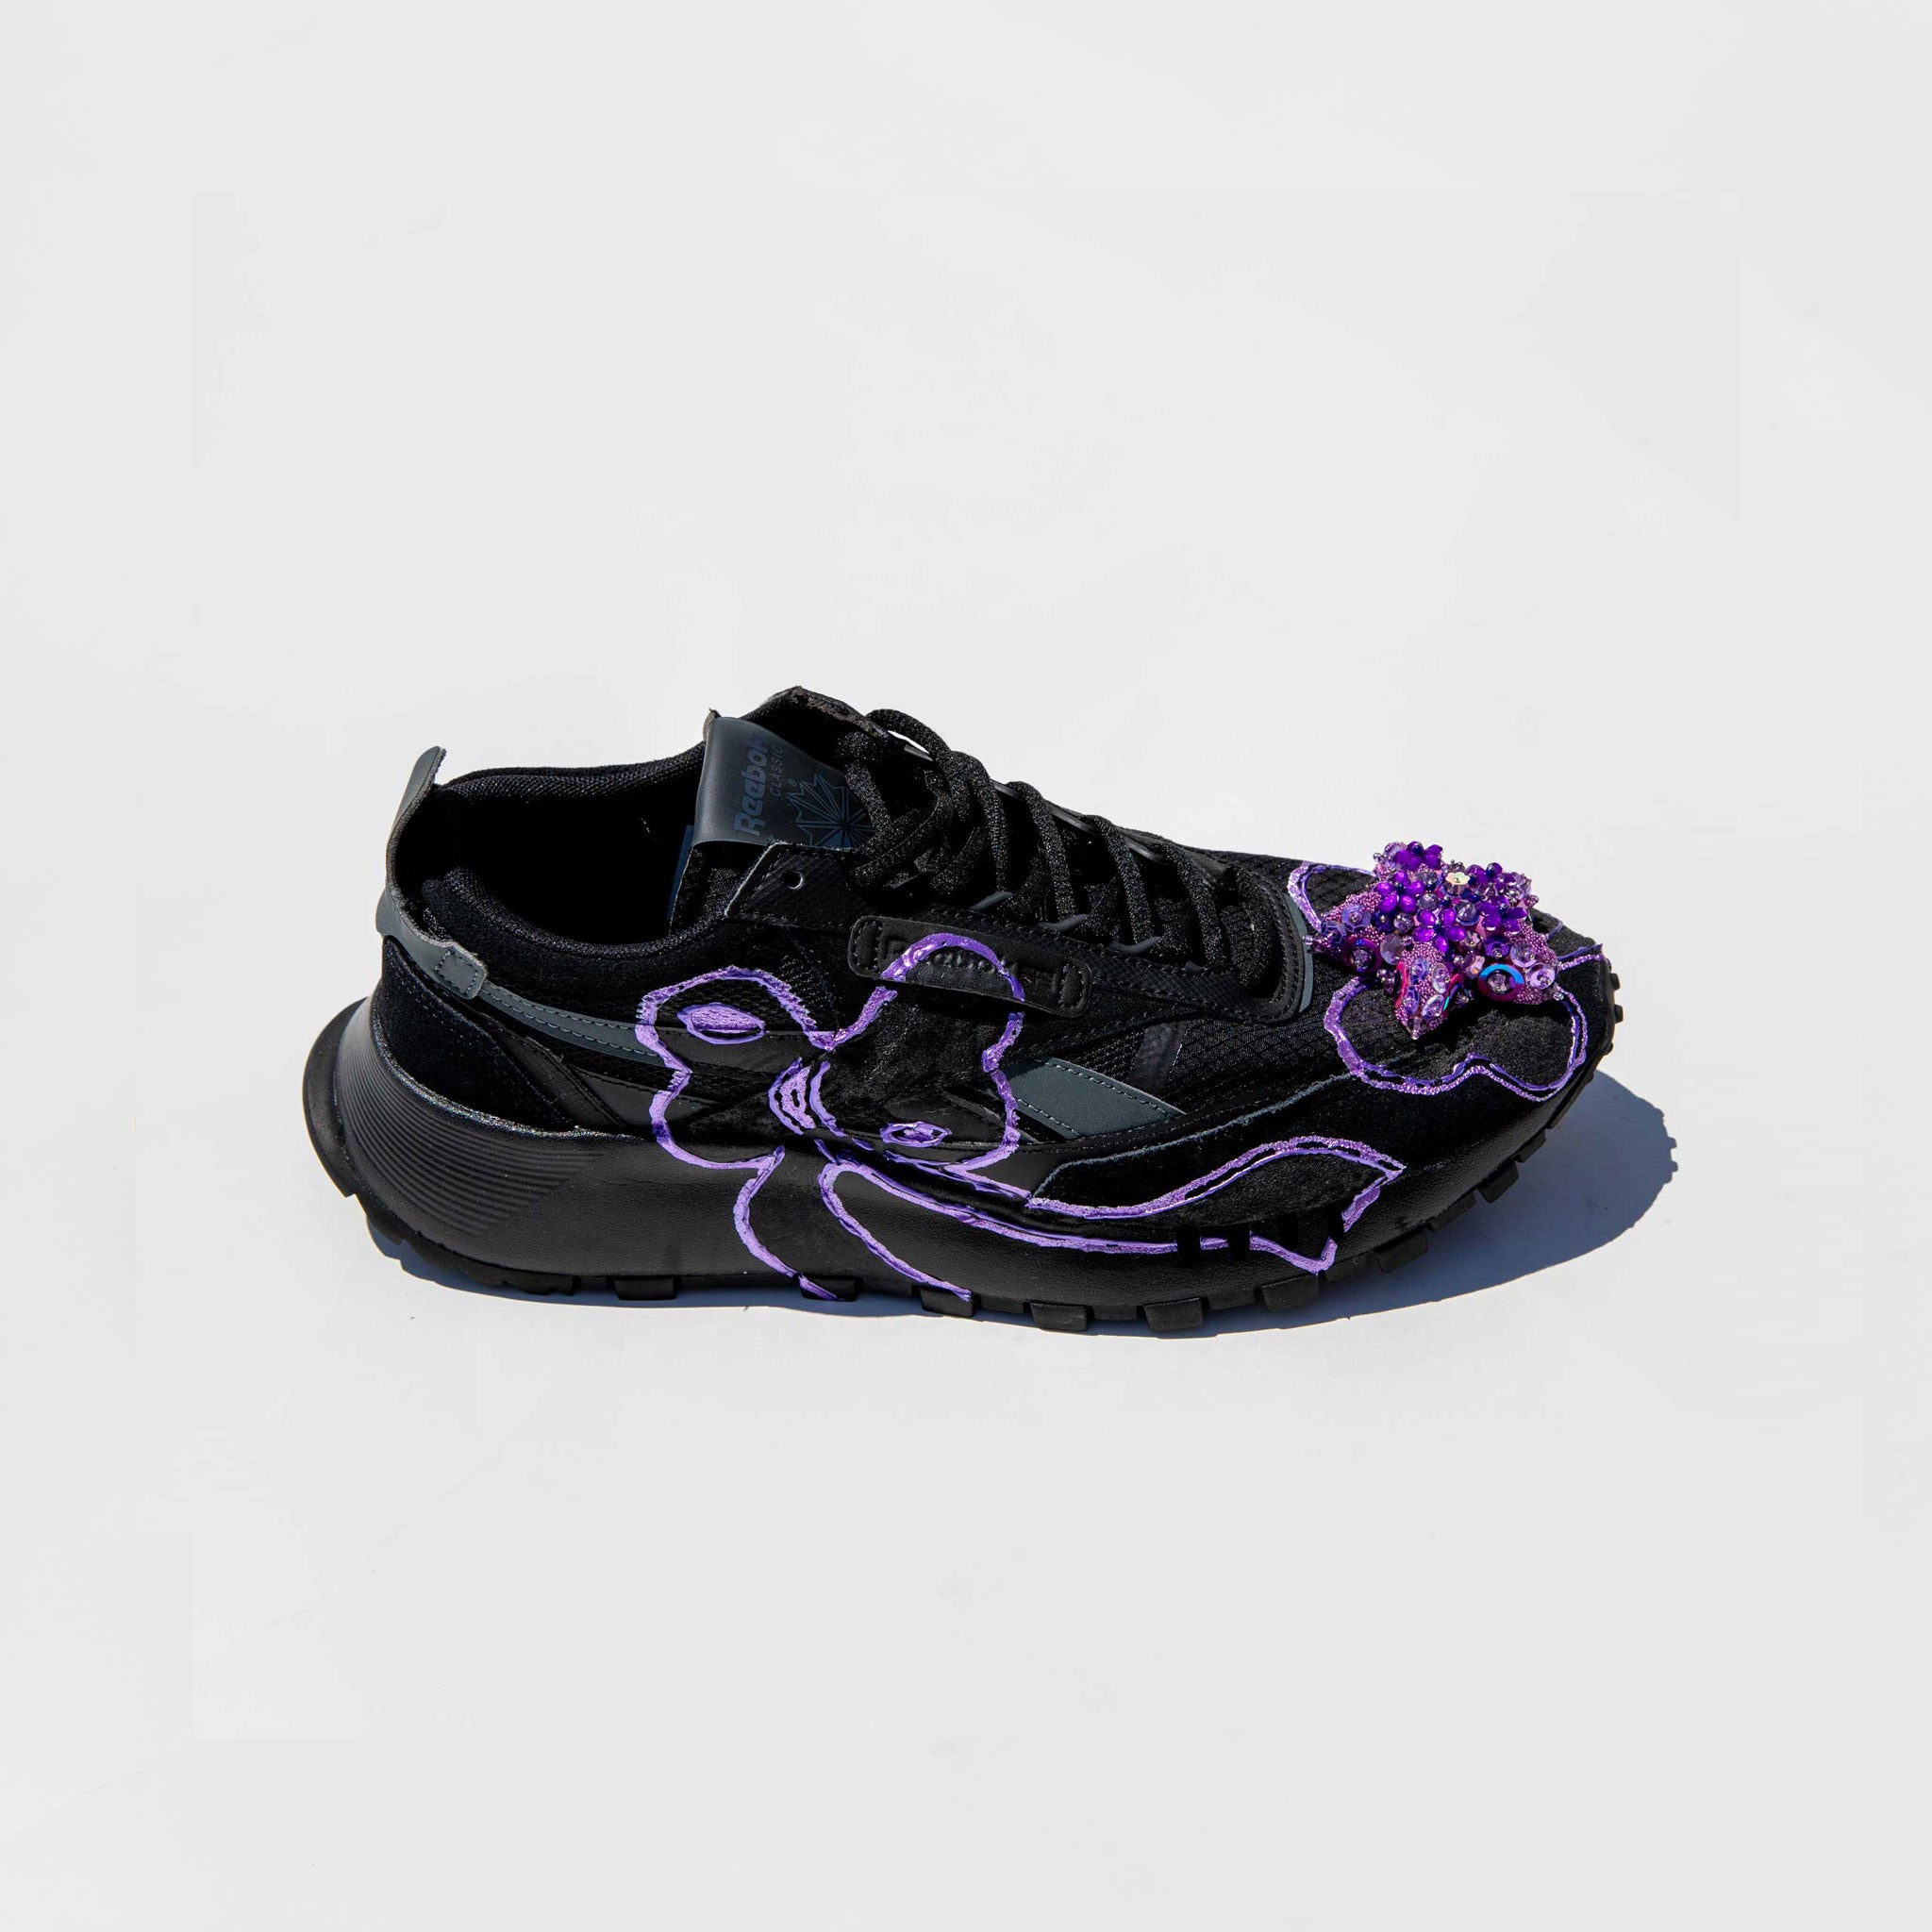 bungeejumpen mozaïek jury Collina Strada - Reebok Black with Purple Sequin Toe Charm - Size 8.5  [Runway Sample] | available at LCD